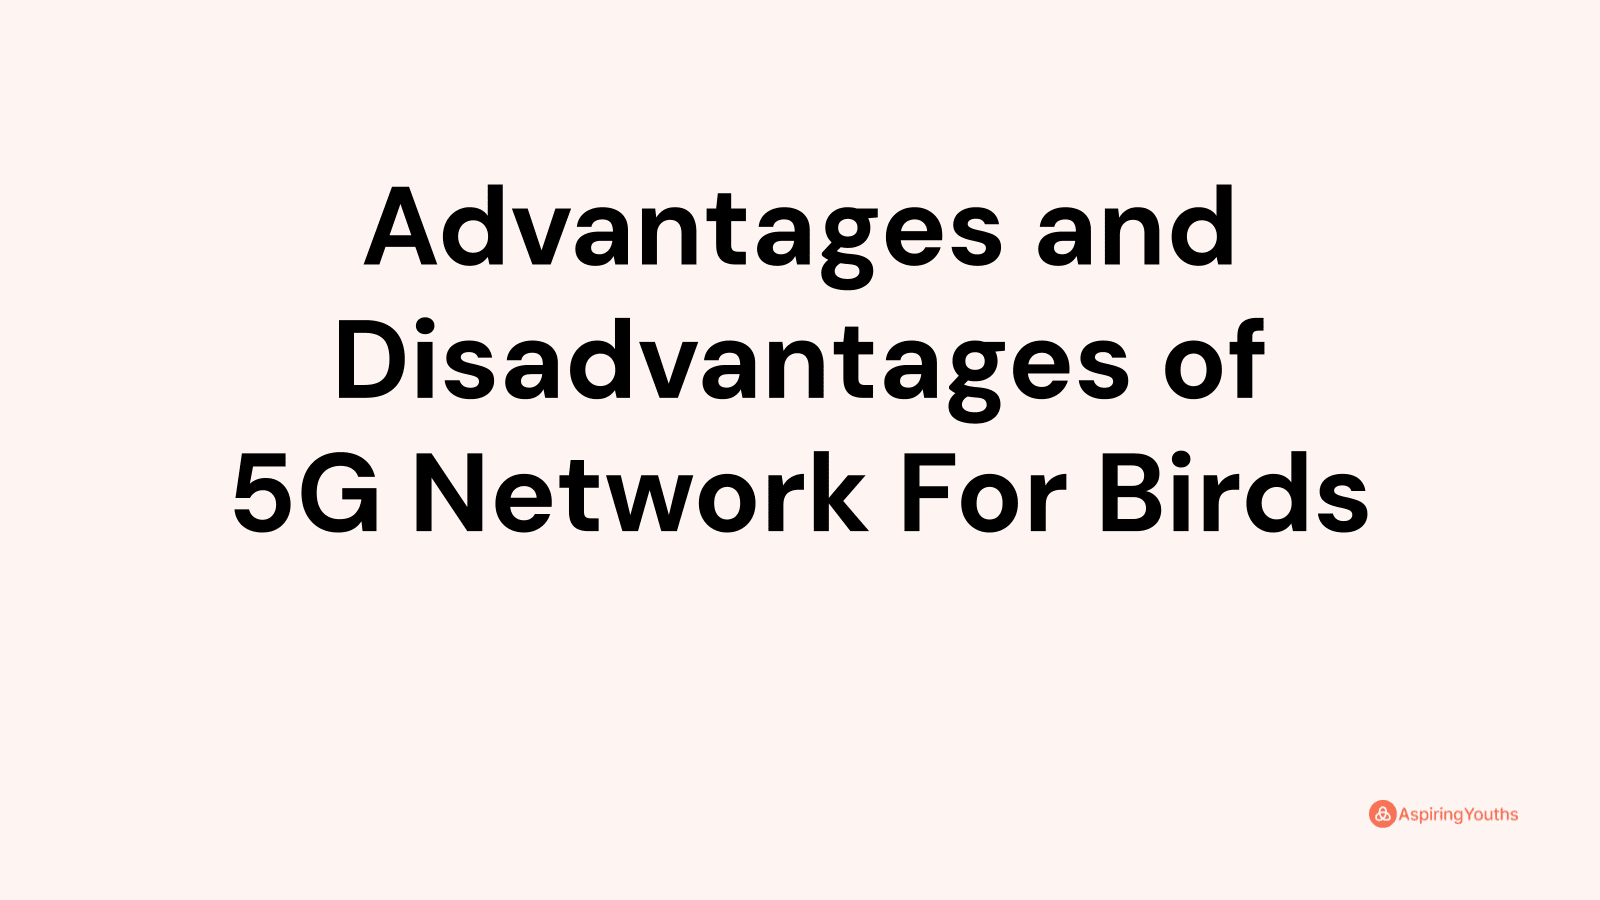 Advantages and disadvantages of 5G Network For Birds